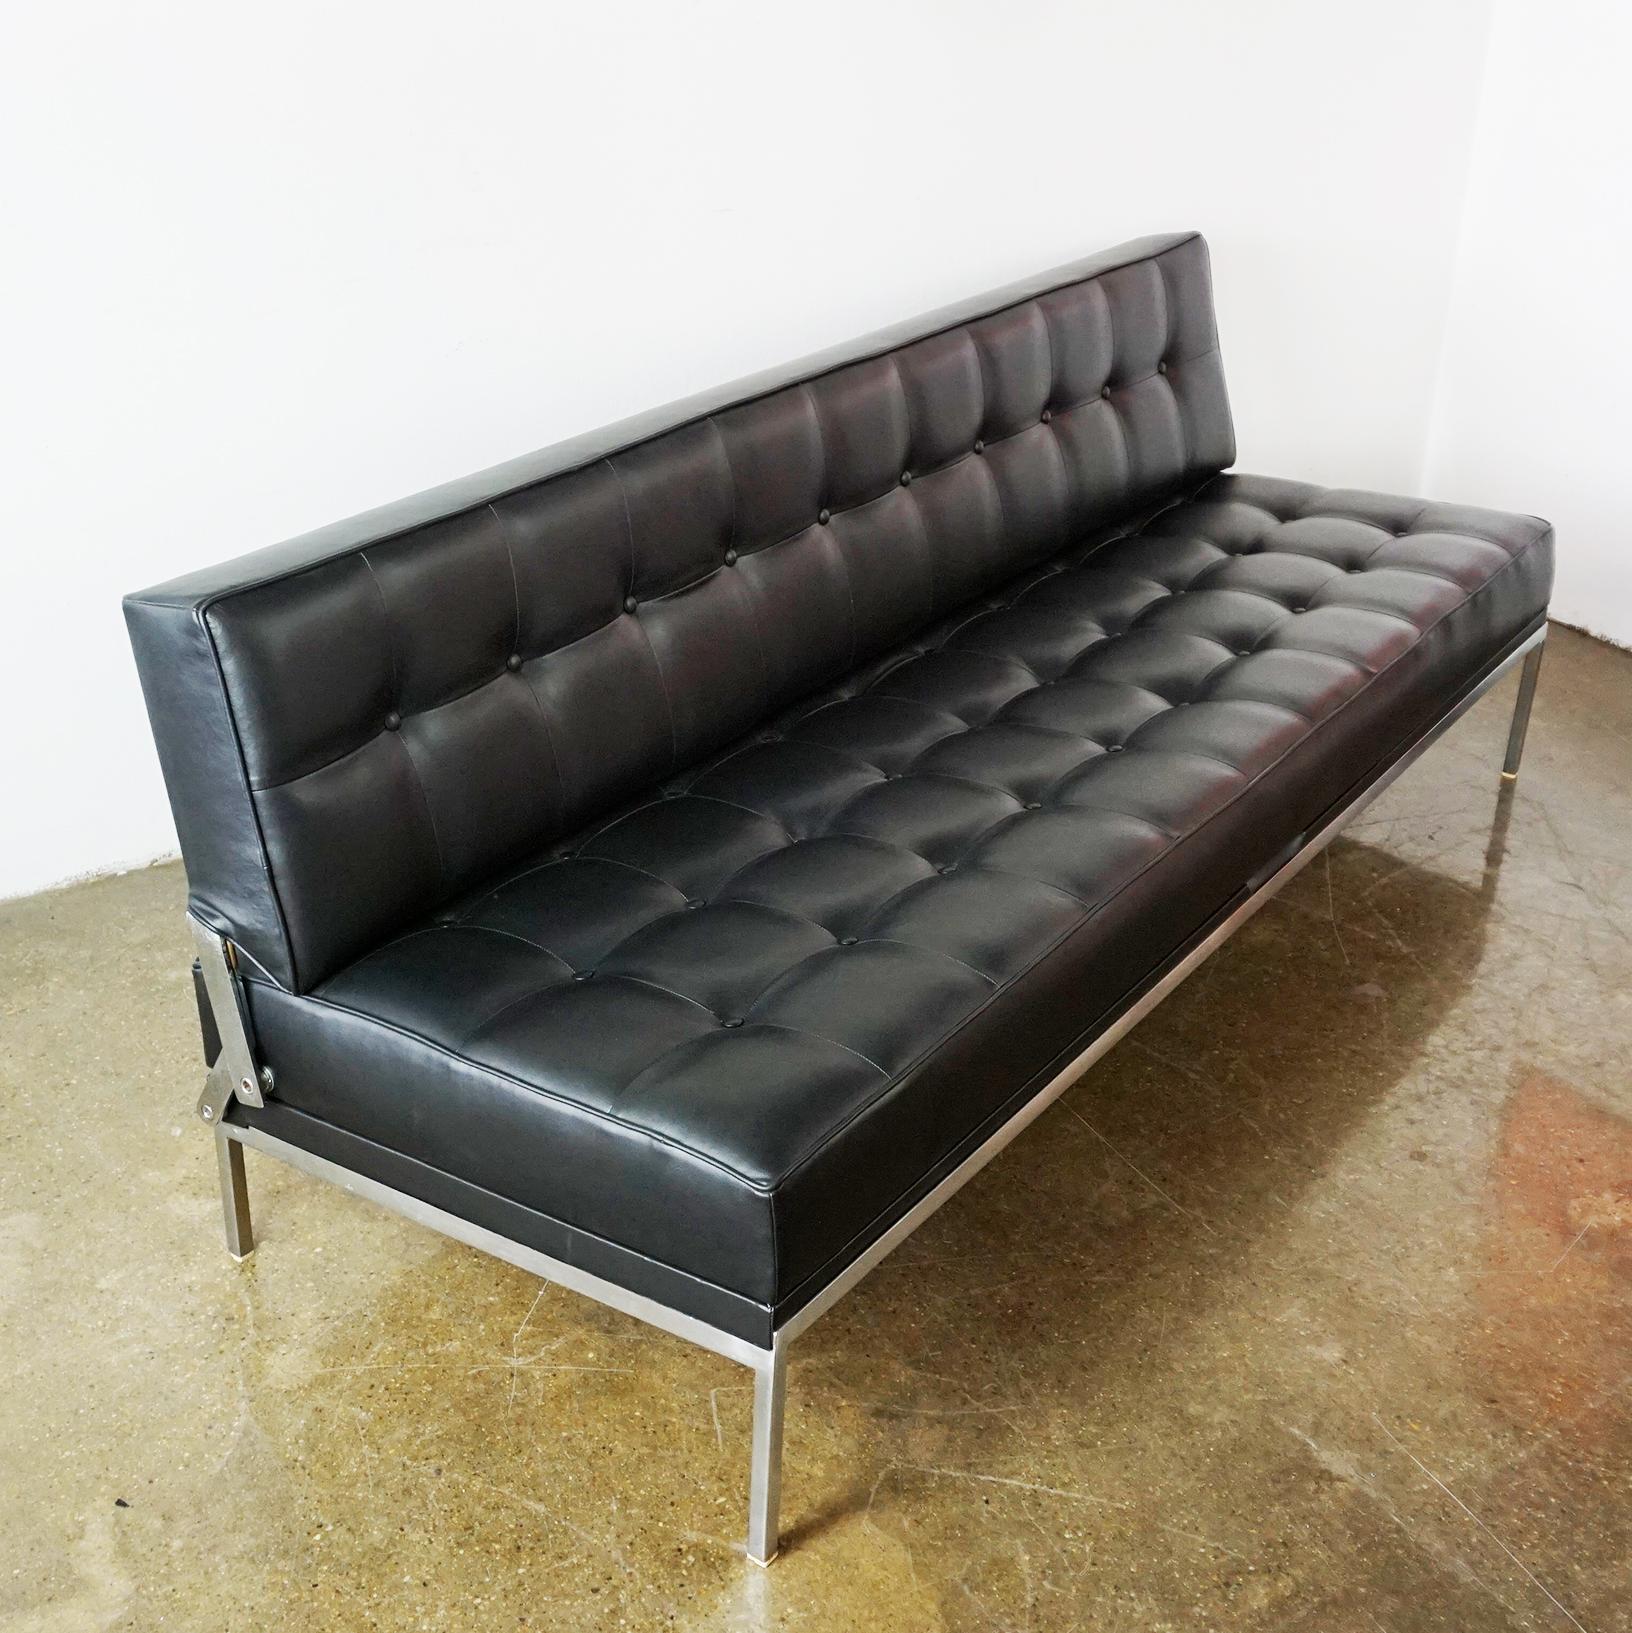 This Austrian Mid-Century Modern vintage sofa or daybed model Constanze with metal Base and renewed black Leather Upholstery was designed by Johannes Spalt 1961 for Wittmann, Etsdorf, Austria. 
It is very easy to handle by one hand to make the